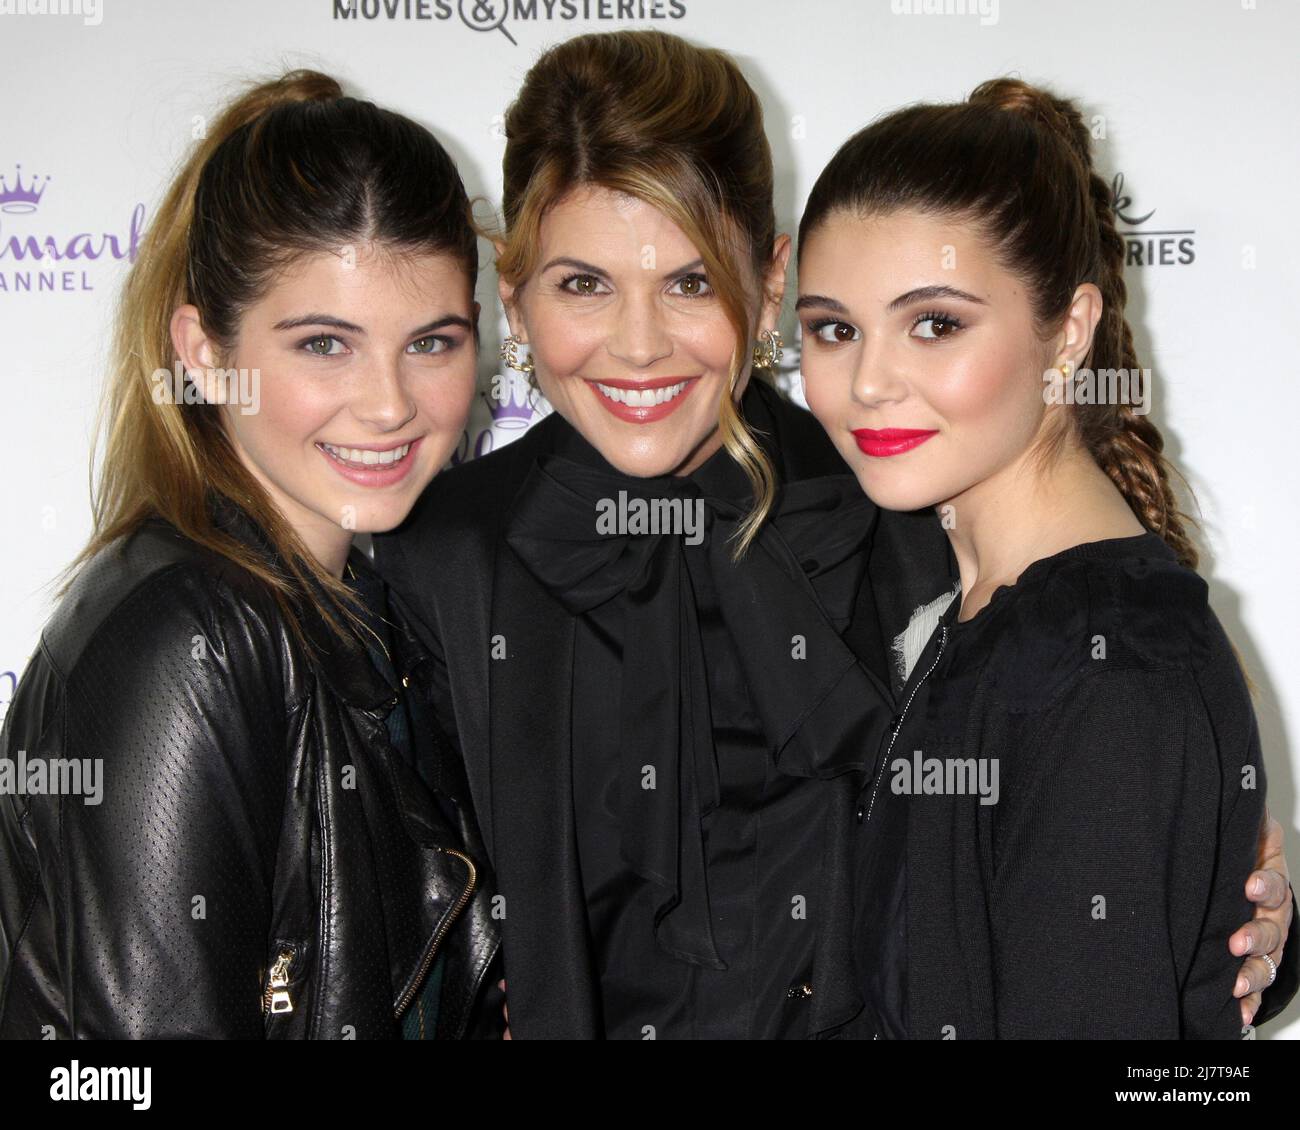 LOS ANGELES - NOV 4:  Lori Loughlin, daughters Isabella Rose Giannulli, Olivia Jade Giannulli at the Hallmark Channel's 'Northpole' Screening Reception at the  La Piazza Restaurant  at The Grove on November 4, 2014 in Los Angeles, CA Stock Photo